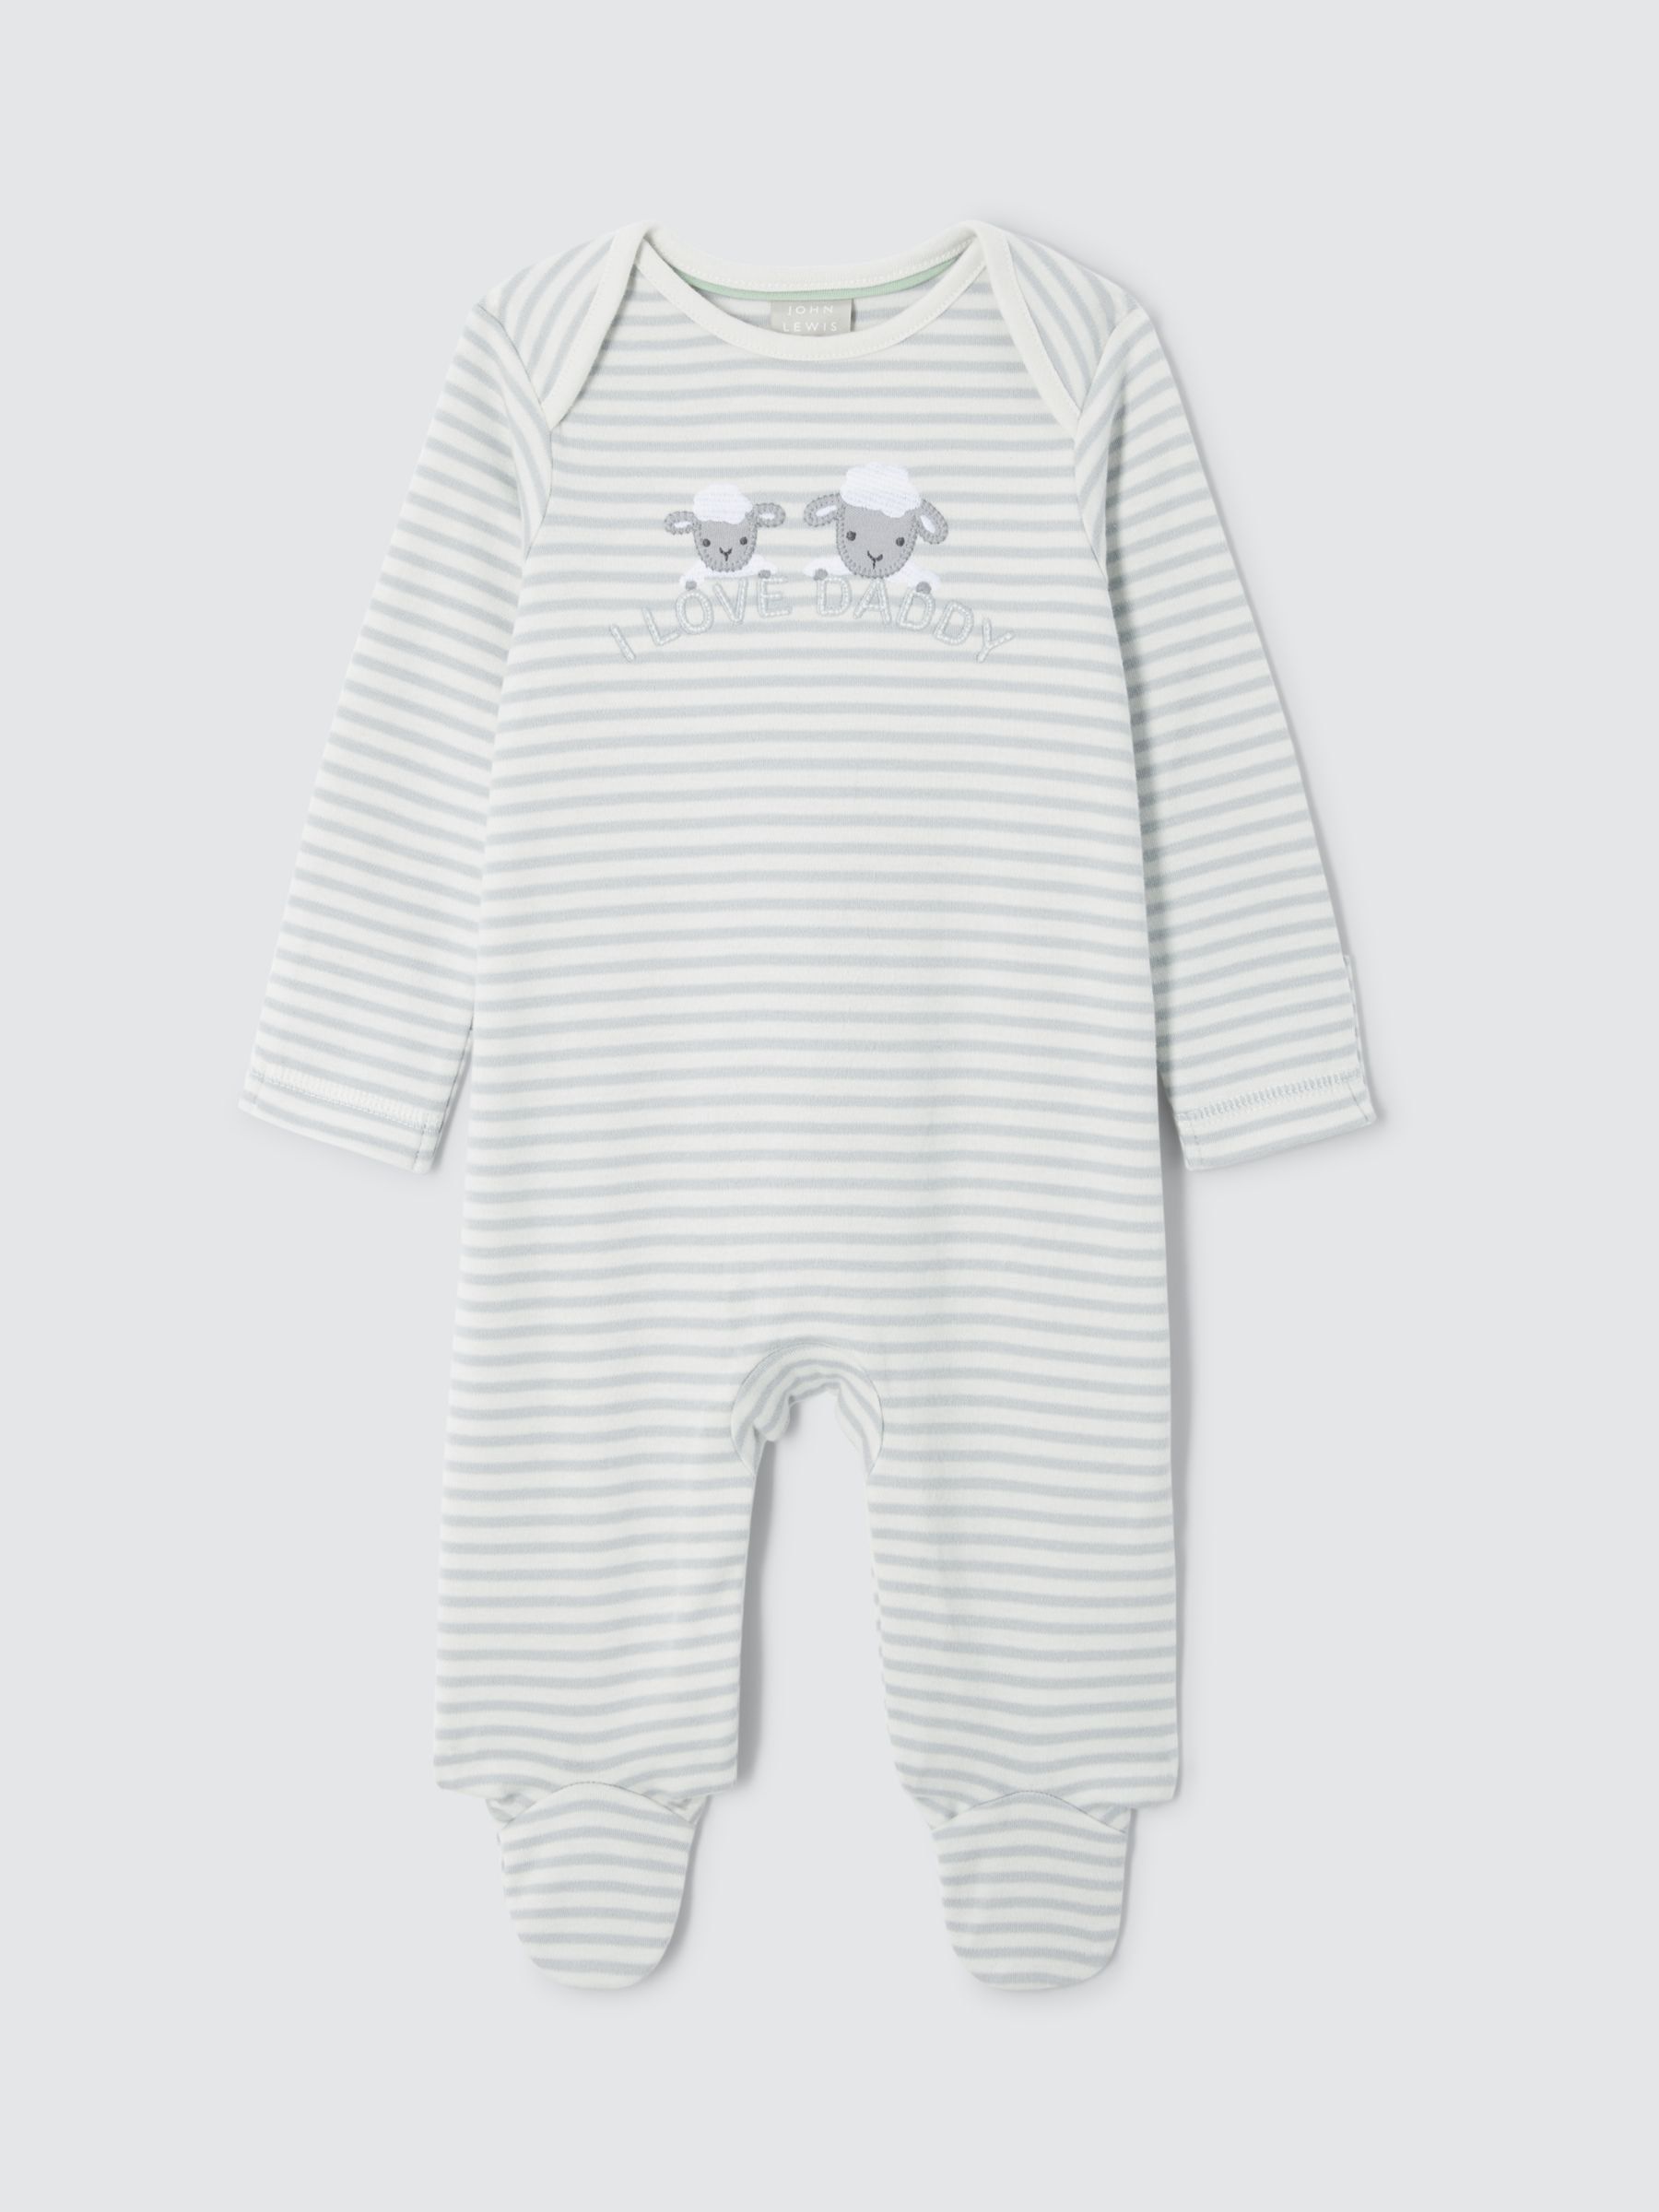 I love daddy sleepsuit in white and gray